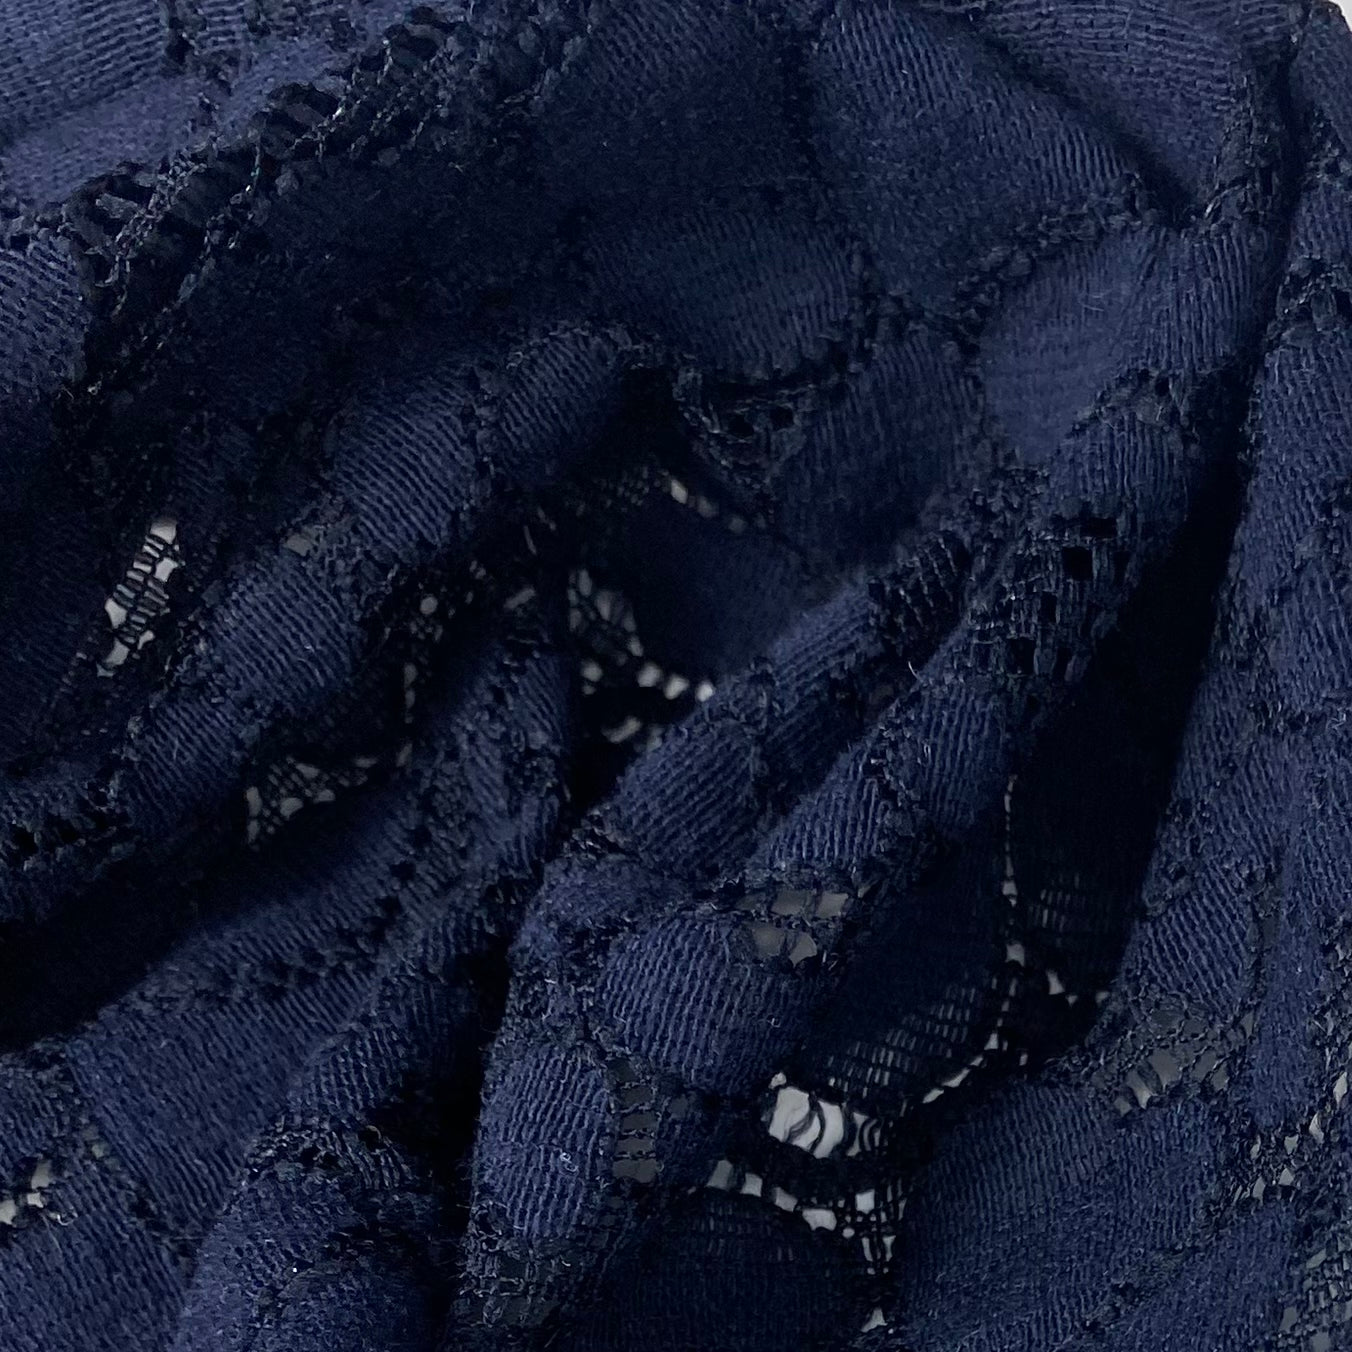 Floral Corded Lace - Navy